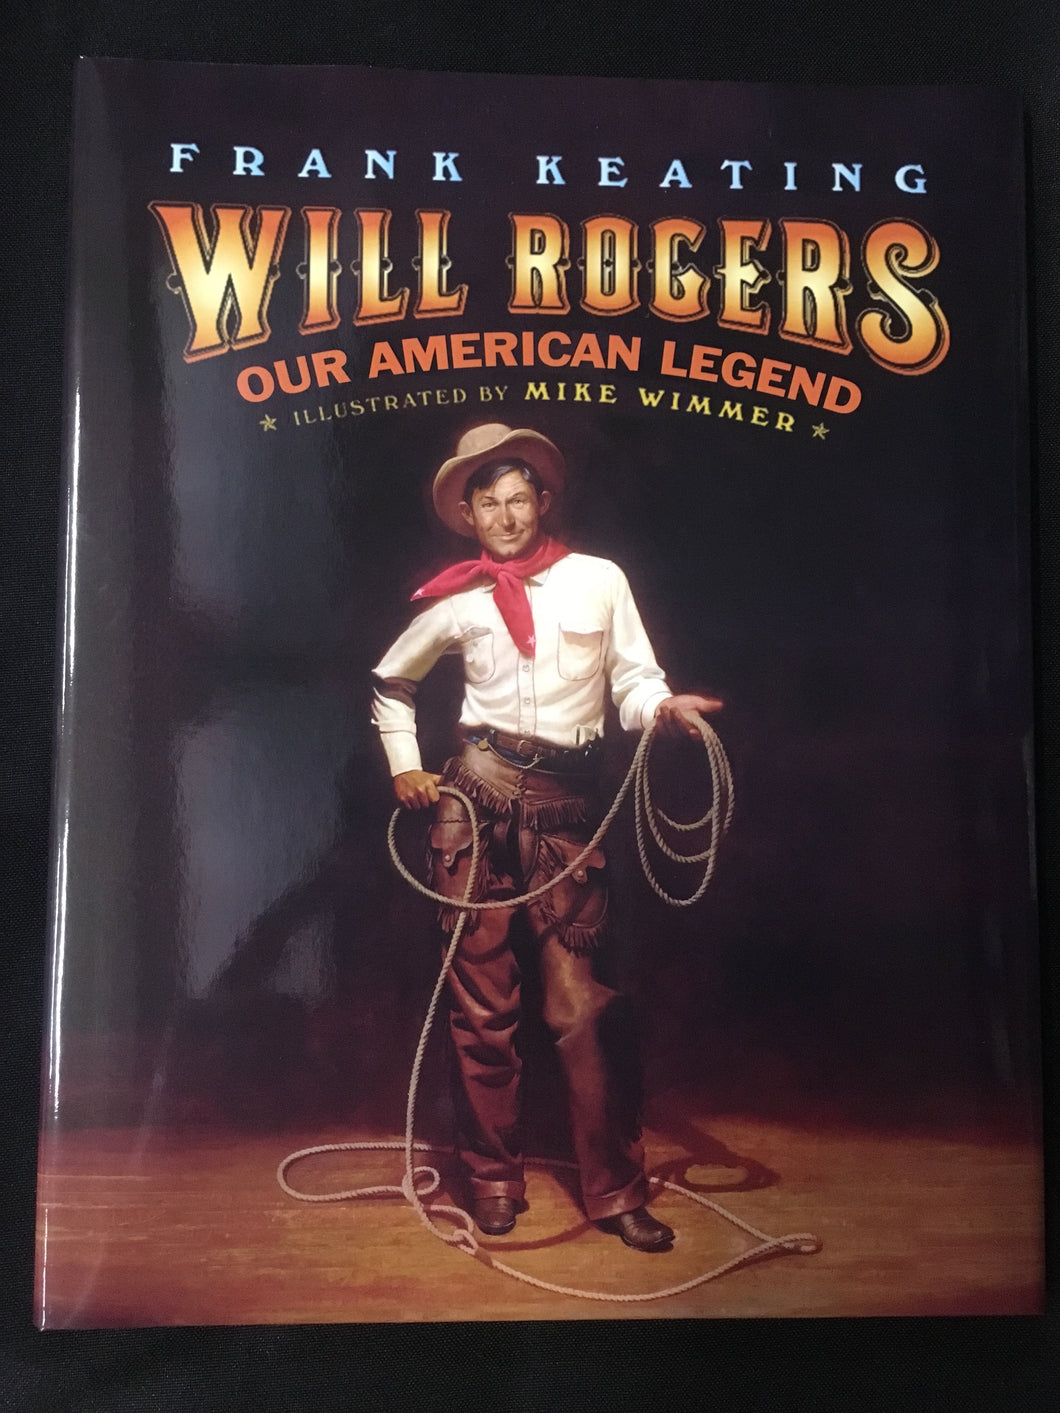 Will Rogers Our American Legend by Frank Keating